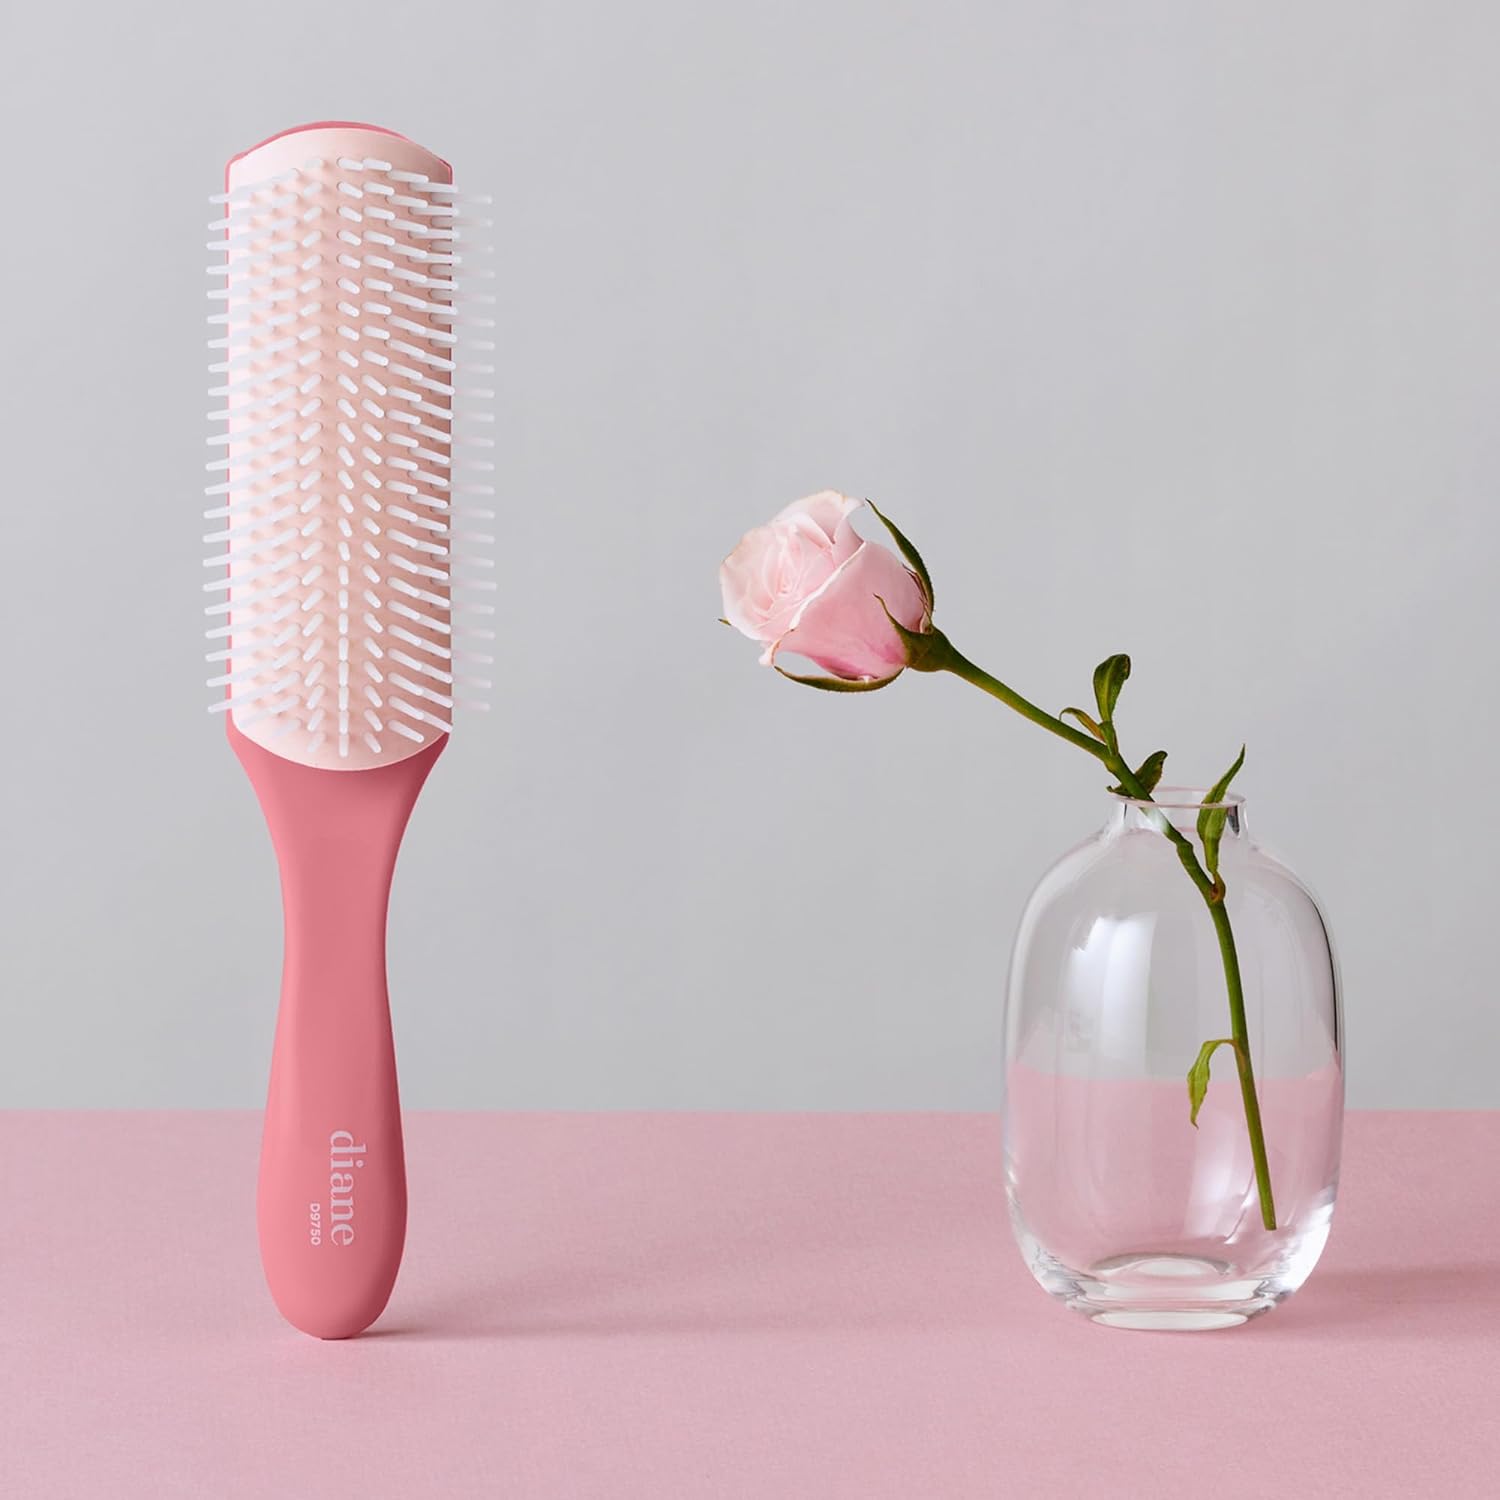 Diane Pro Nylon Pin Styling Hair Brush for Detangling, Separating, Shaping and Defining Wet Thick or Curly Hair, Glides Through Tangles with Ease : Beauty & Personal Care